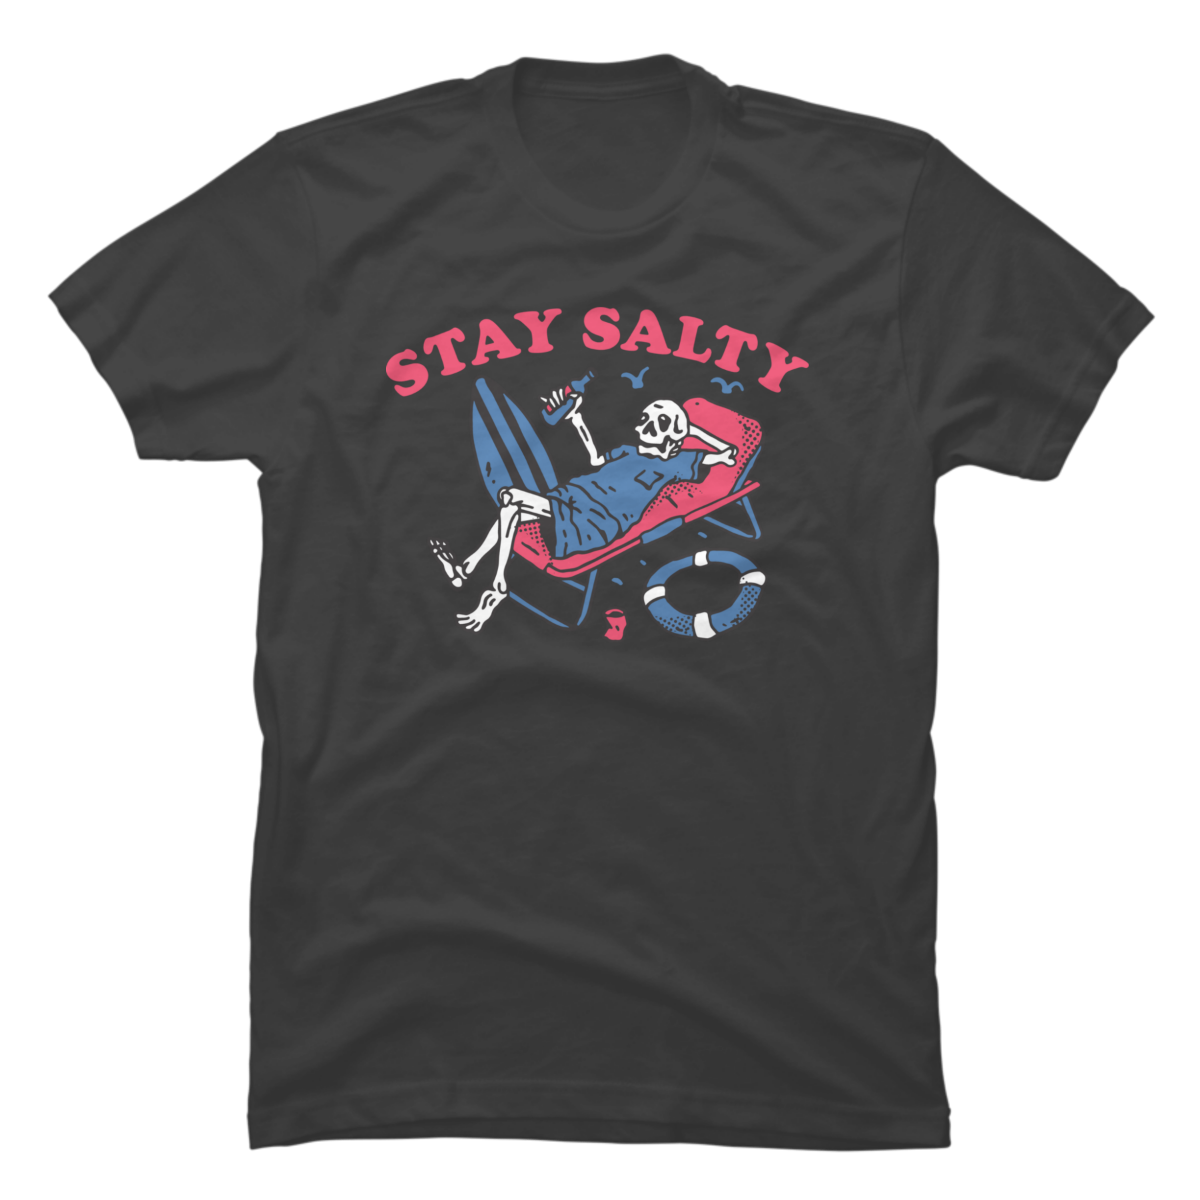 stay salty t-shirt